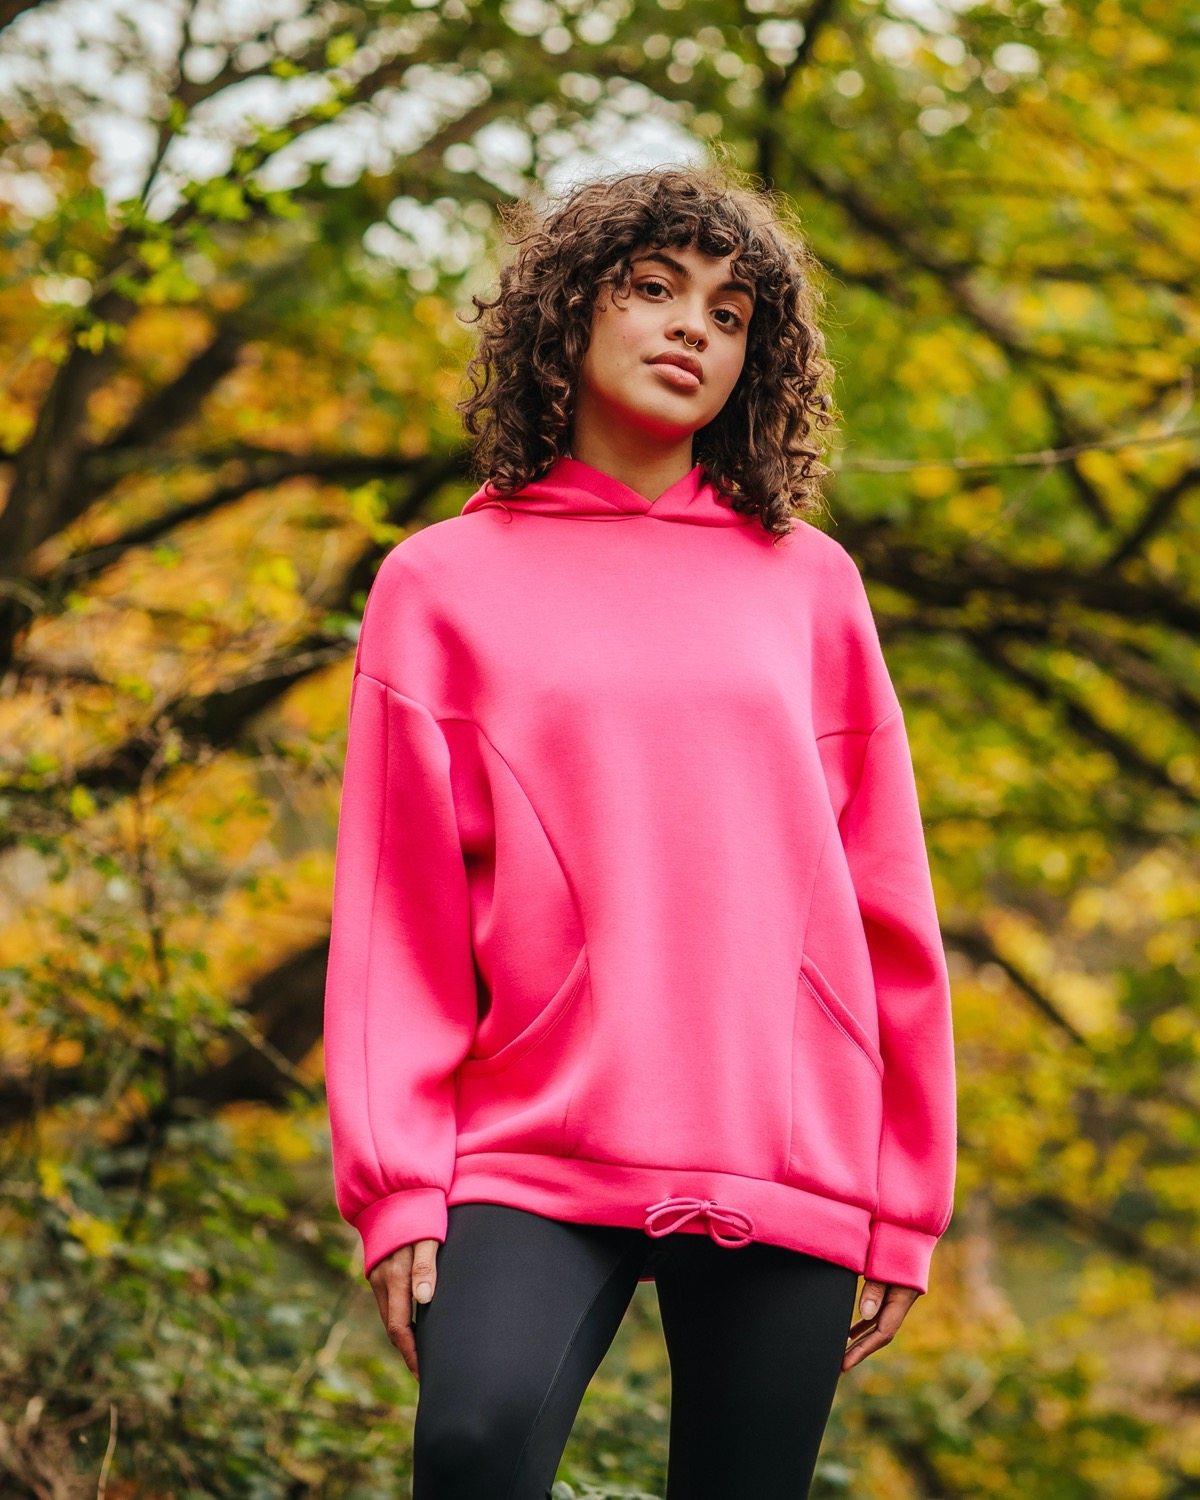 https://dunnes.btxmedia.com/pws/client/images/catalogue/products/6010168/zoom/6010168_pink.jpg